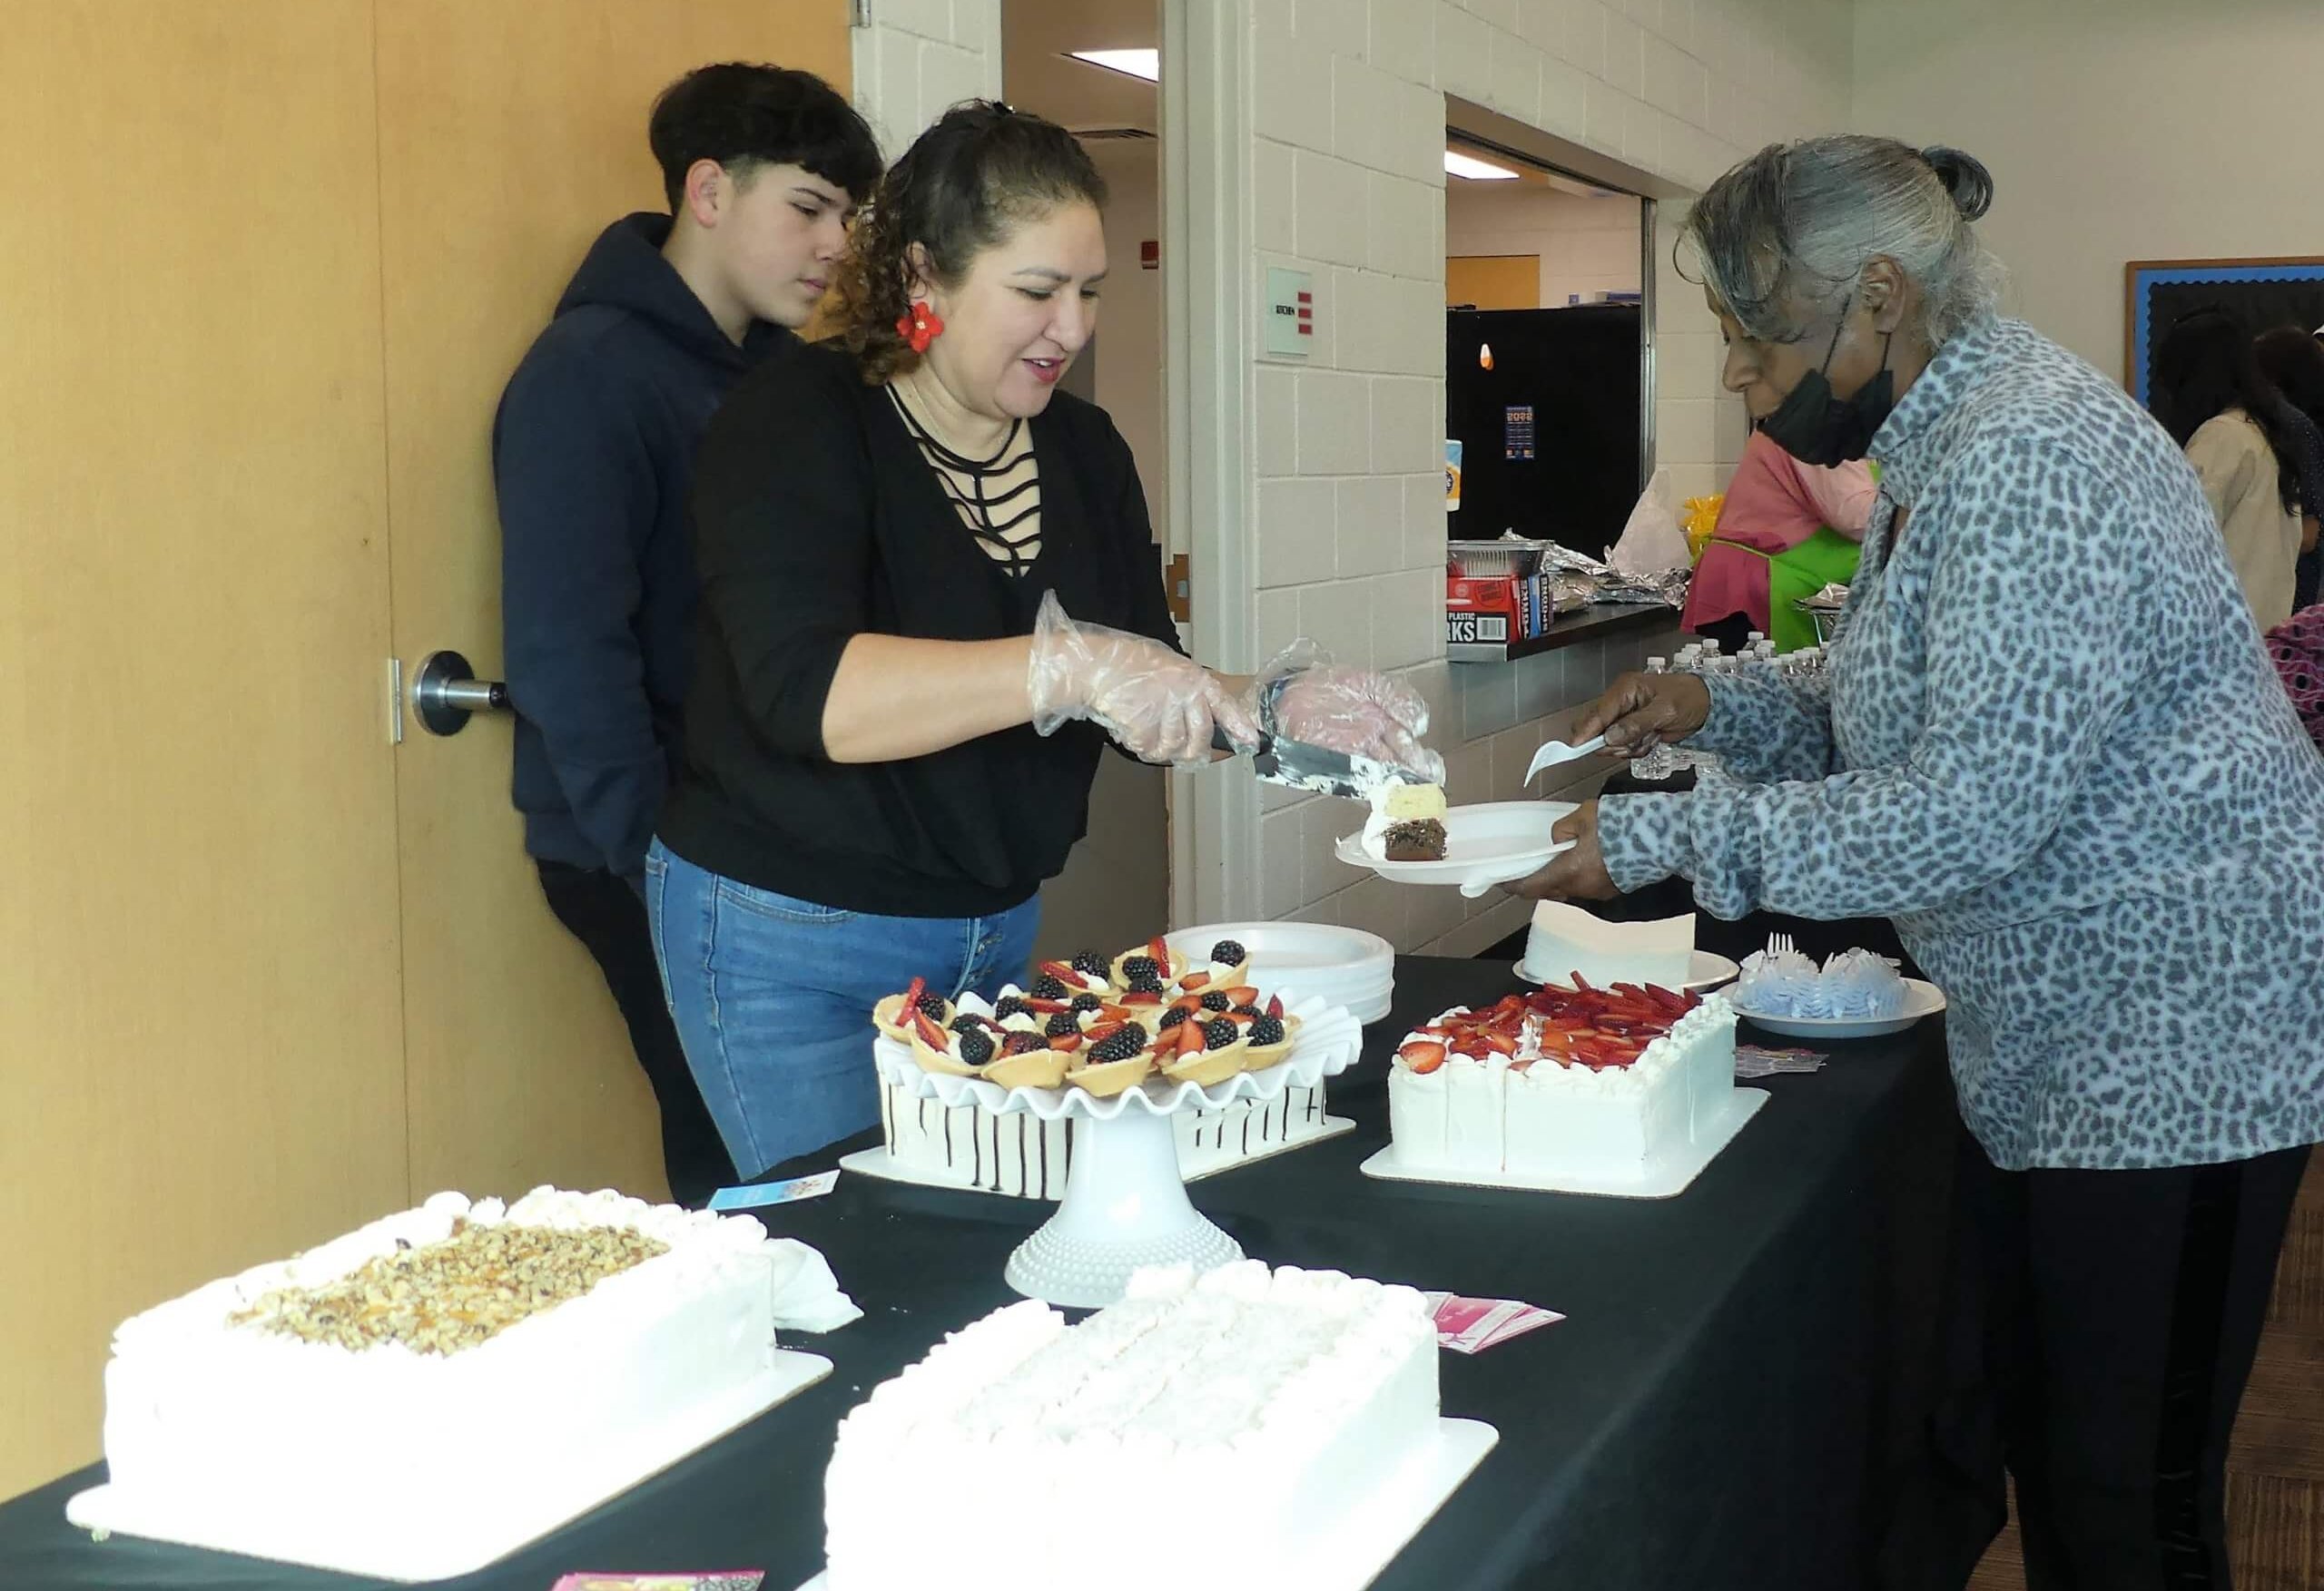 A woman serves cake to another woman at a potluck